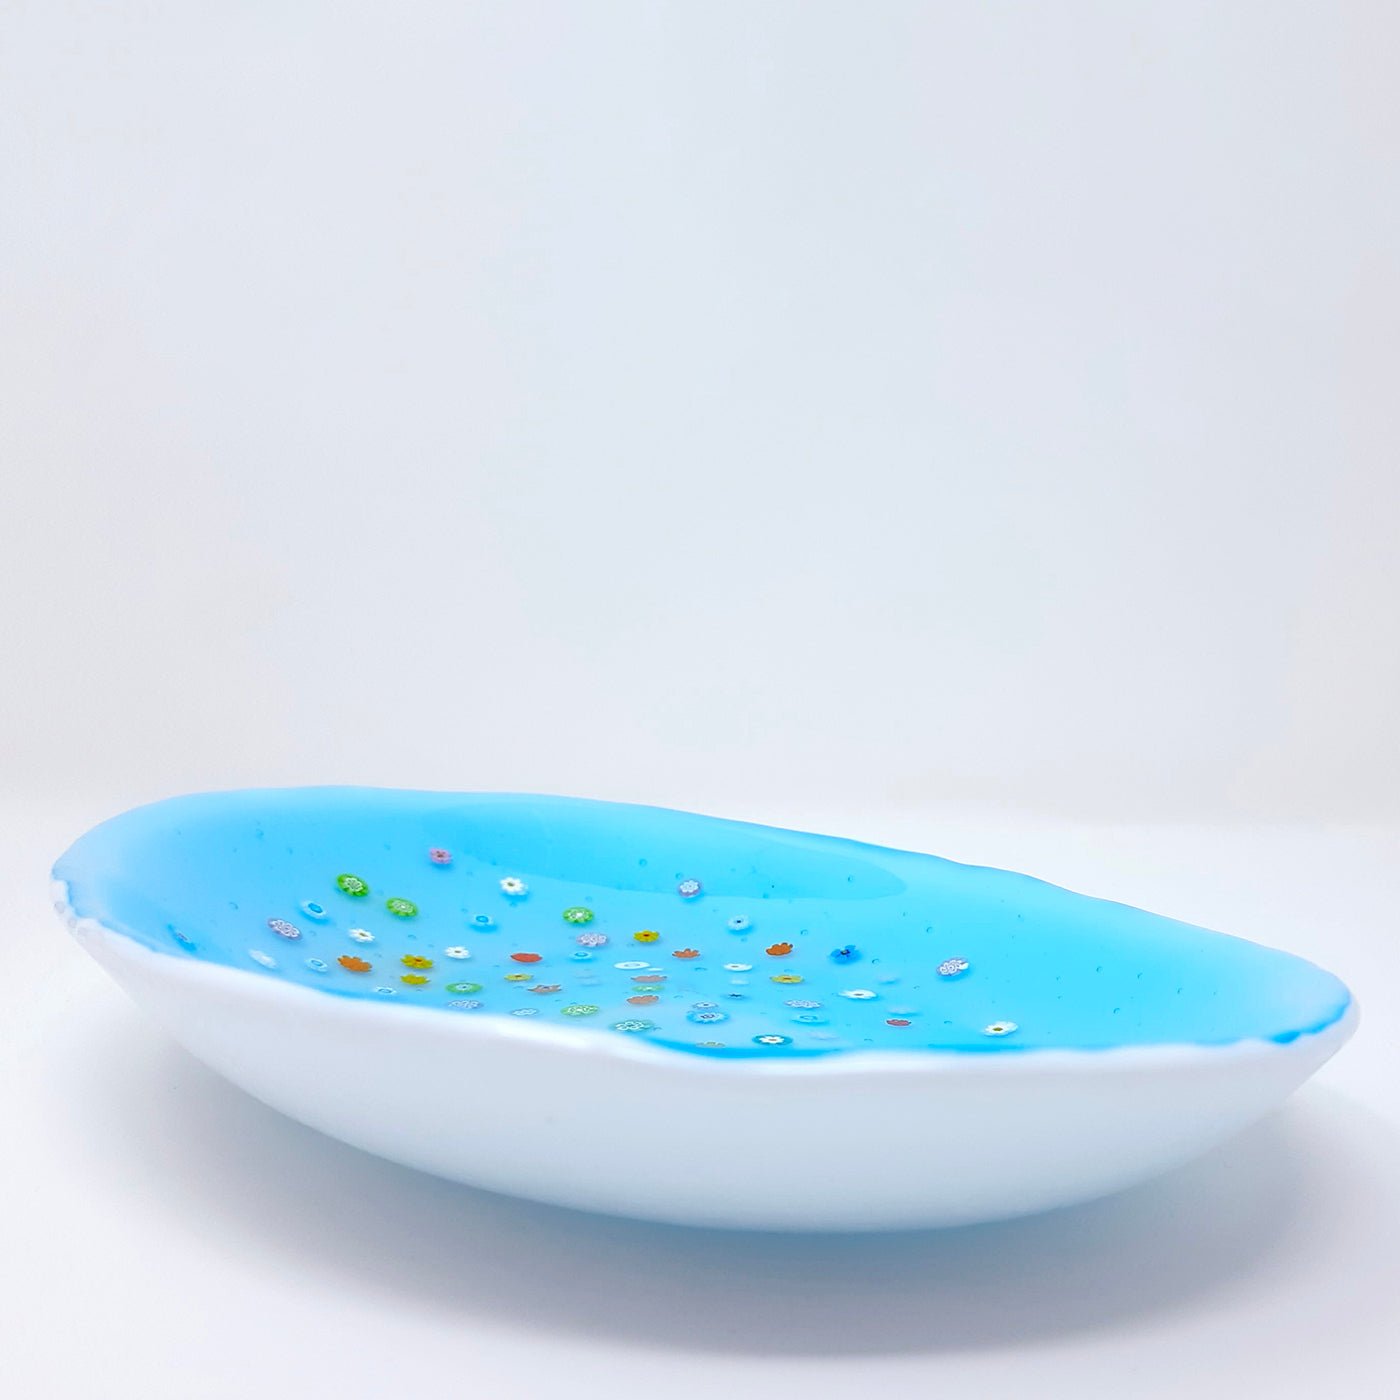 Turquoise Glass Serving Platter with Floral Murrini Inlays  - Alternative view 1